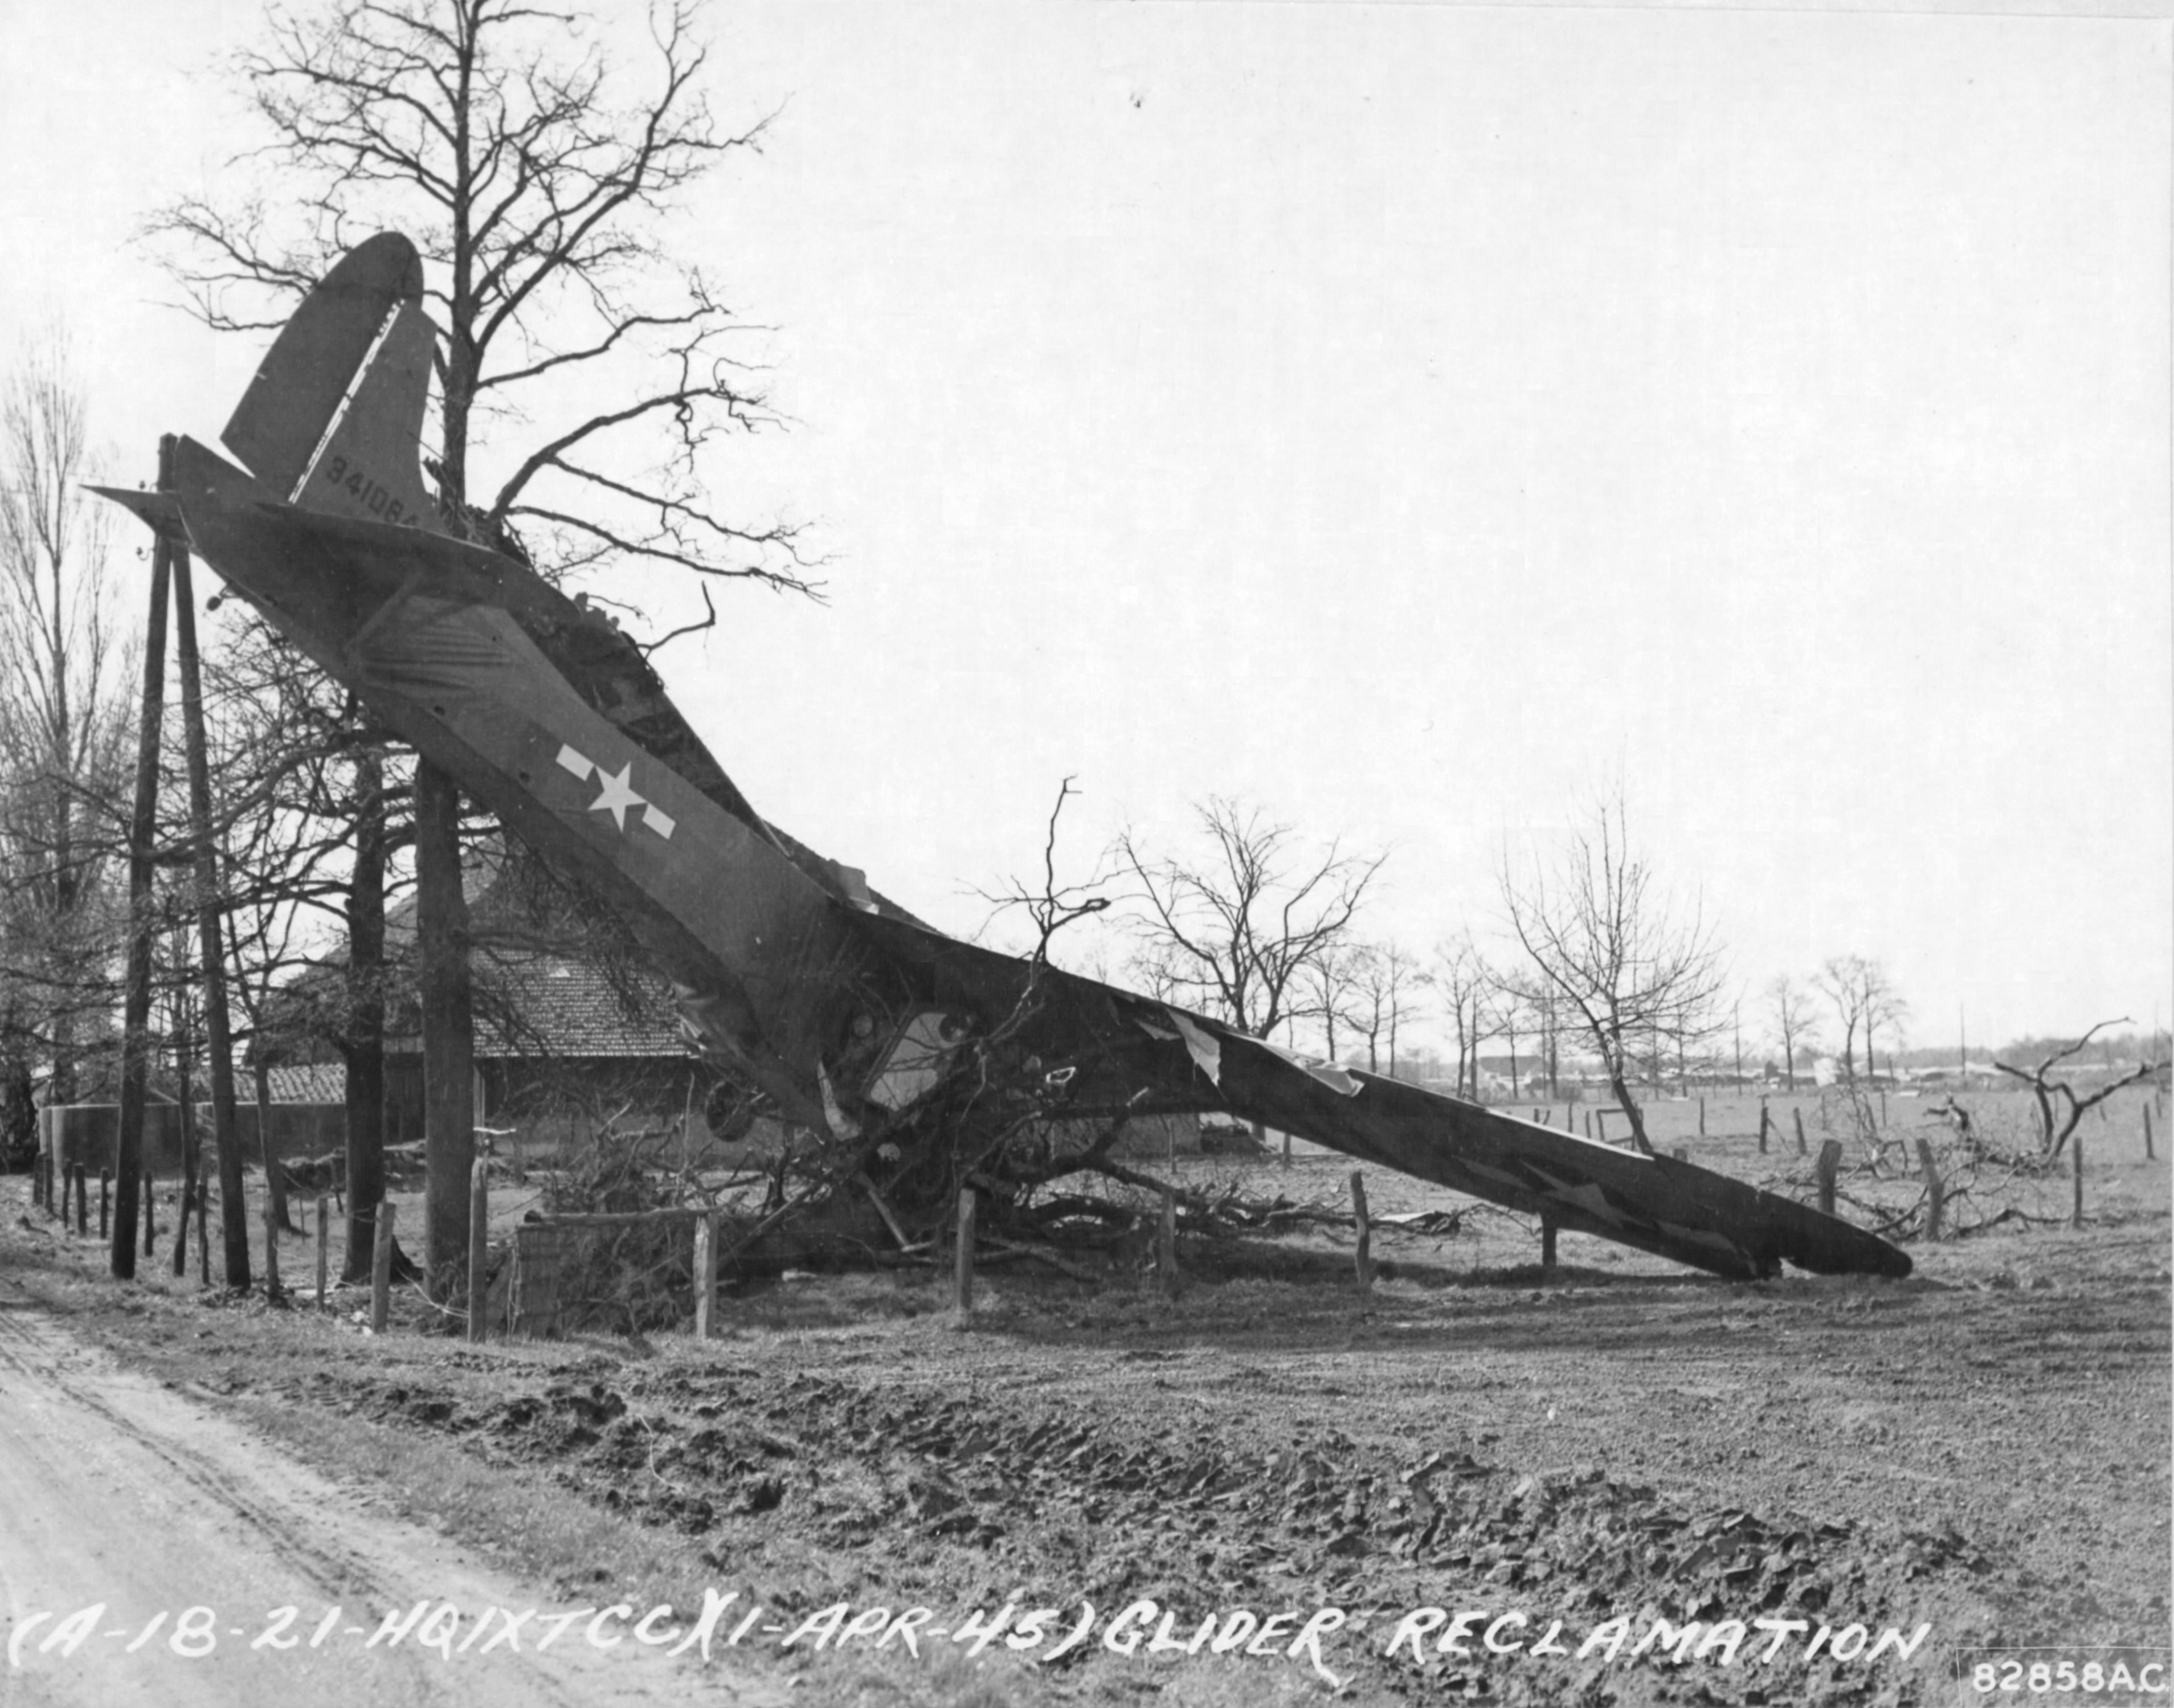 CG-4A Troop Glider being recovered at Wesel, Germany Apr 1 1945